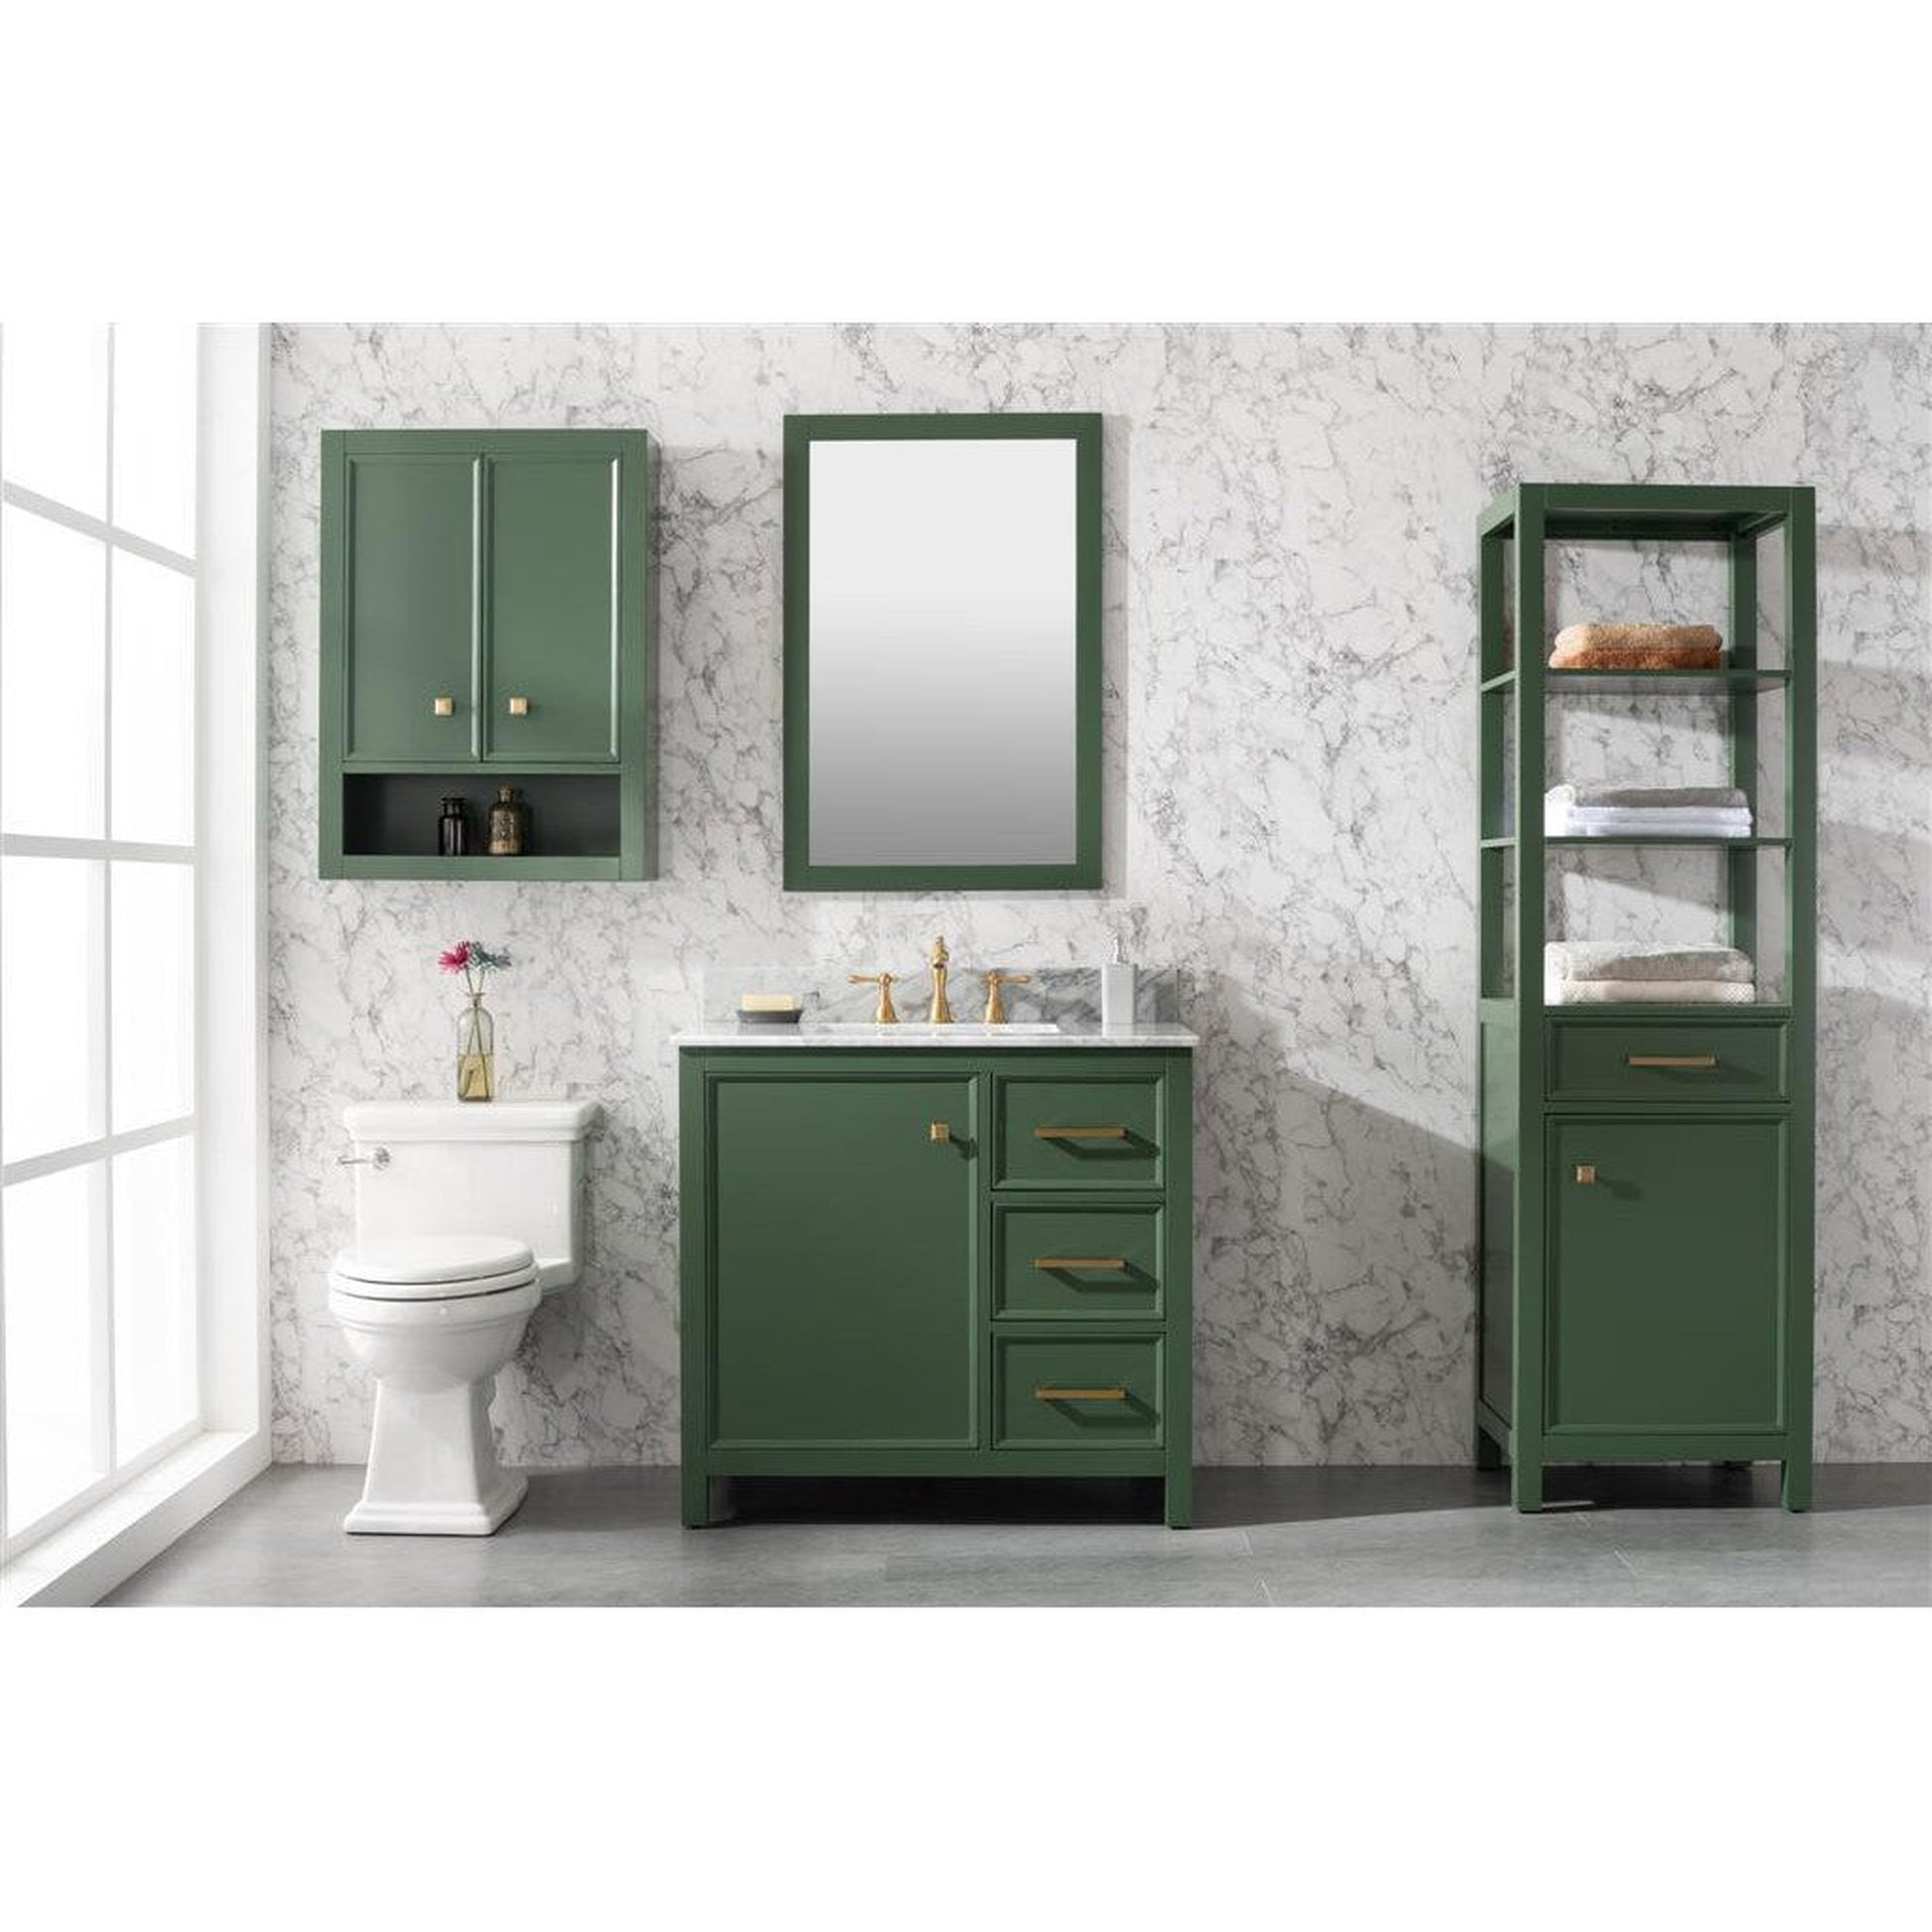 Legion Furniture WLF2136 36" Vogue Green Freestanding Vanity With White Carrara Marble Top and White Ceramic Sink